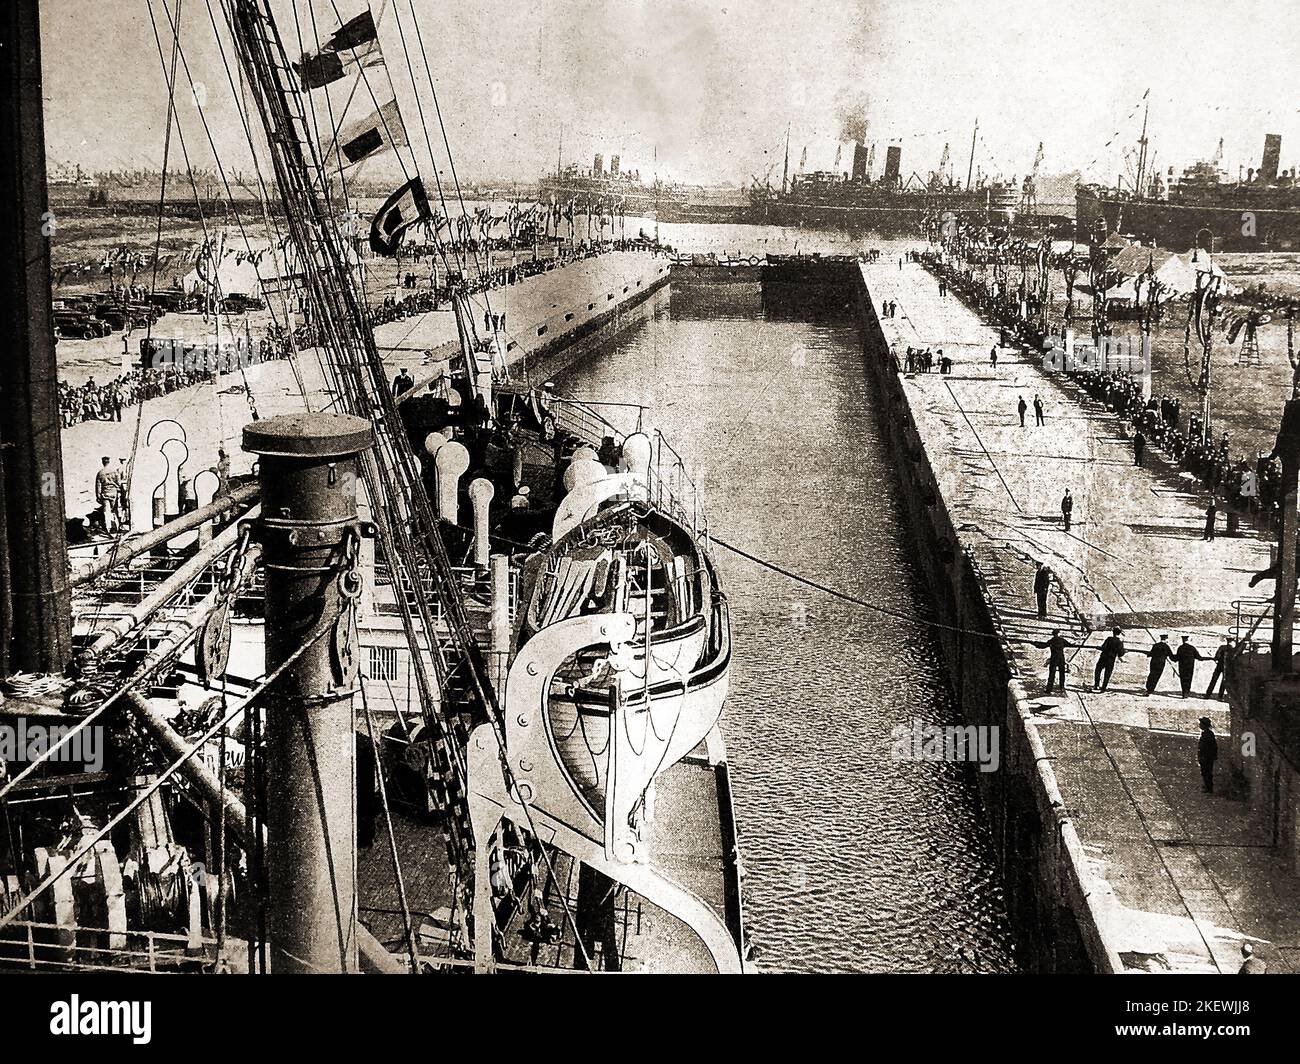 Circa 1930.  A ship being put in a drydock at Tilbury Docks, London , UK. Tilbury docks were opened in 1886 to alleviate congestion in the main London docks. Land reclamation work was undertaken by the Tilbury contracting and Dredging Company Stock Photo